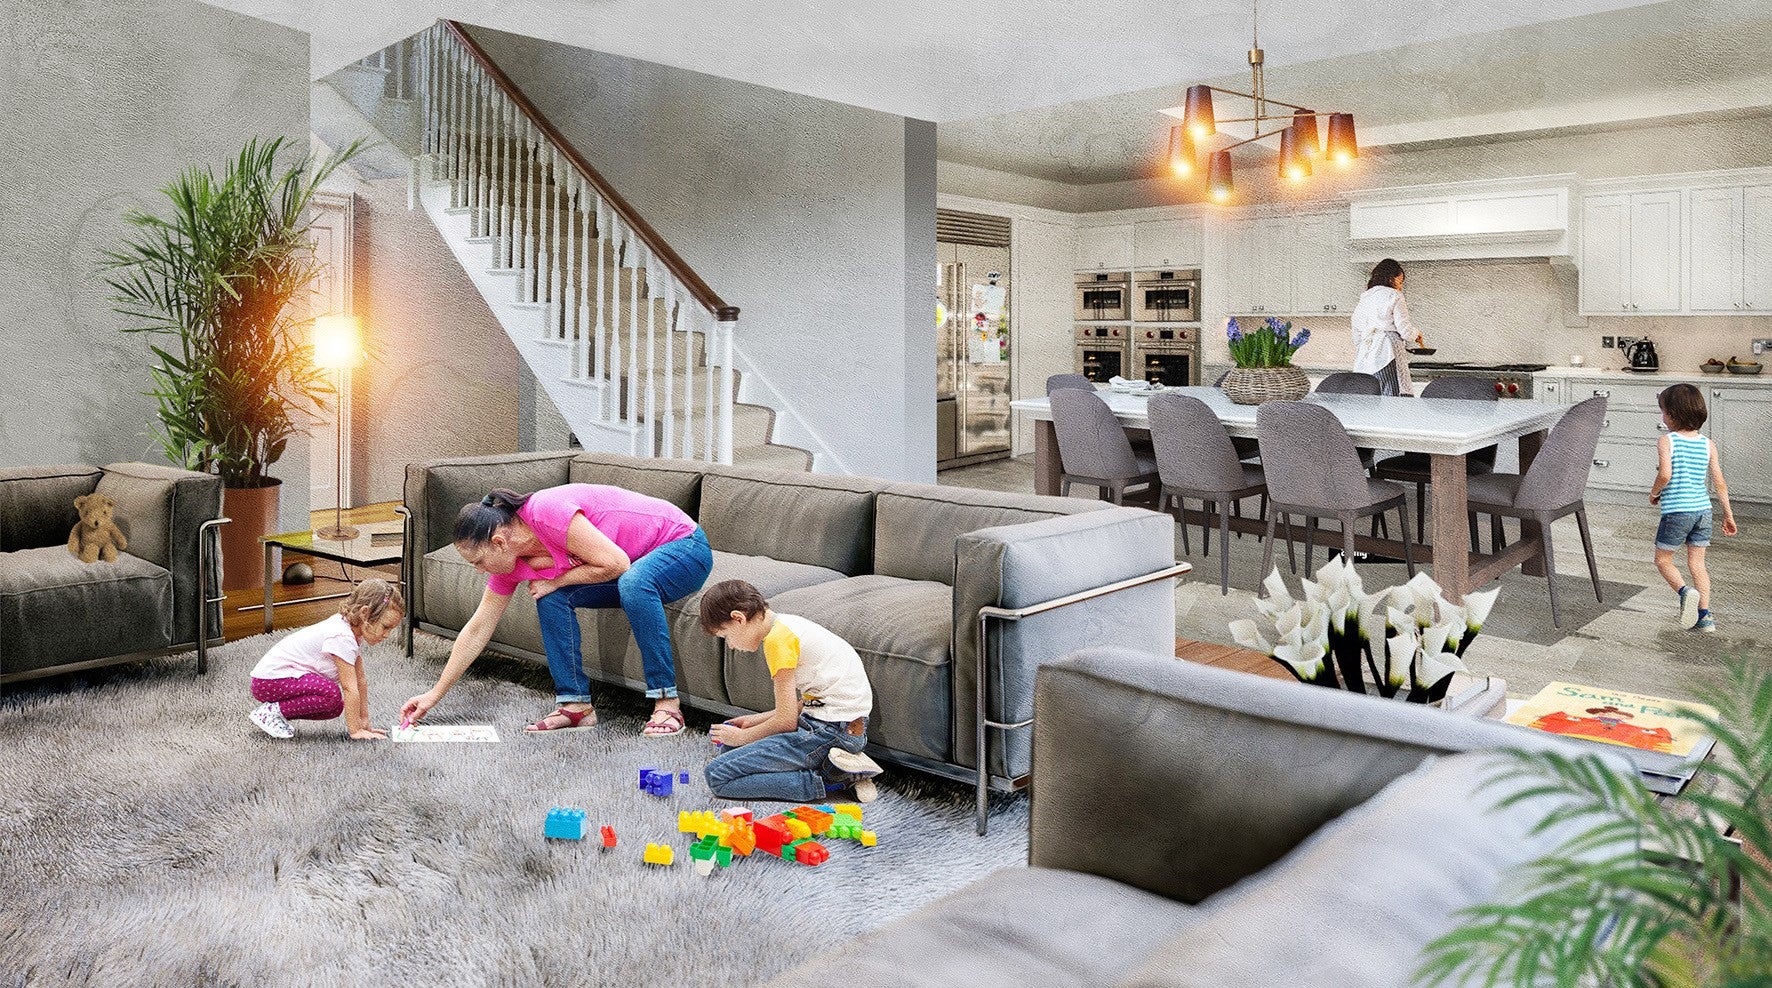 Artists impression of what the living area could look like (Dragonfly video production)